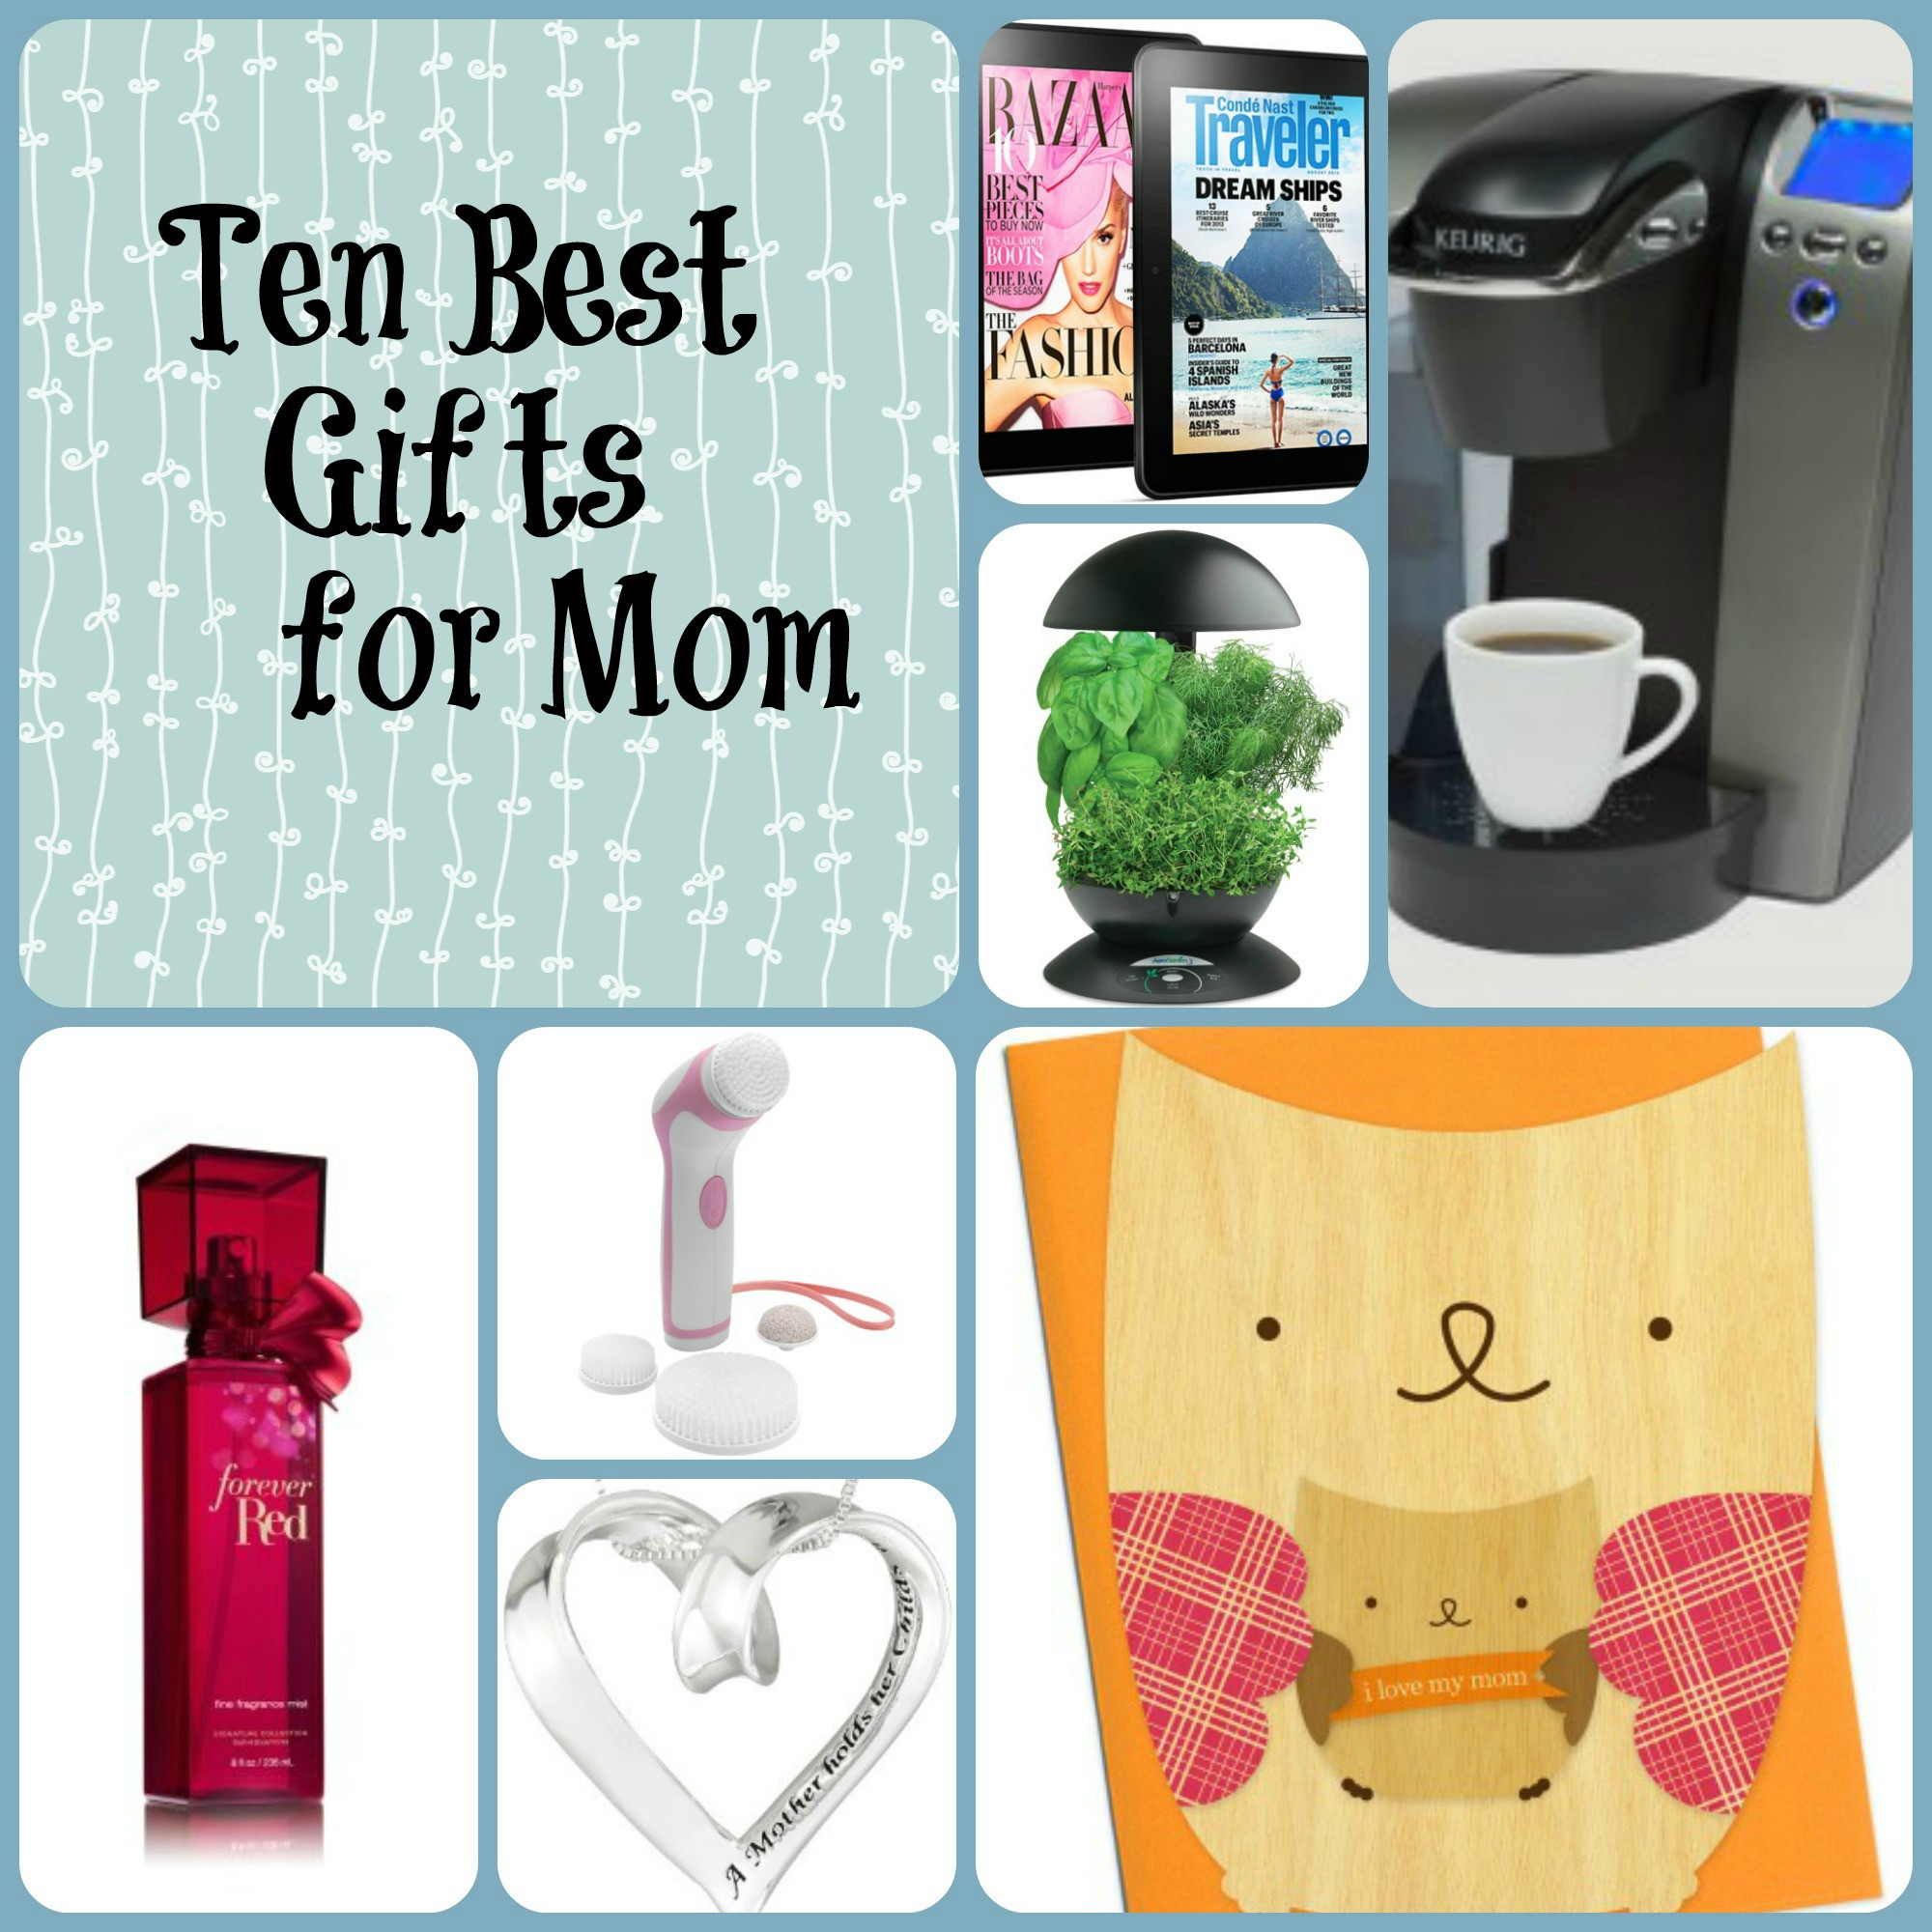 Best Gift Ideas For Mom
 Ten Best Gifts for Mom